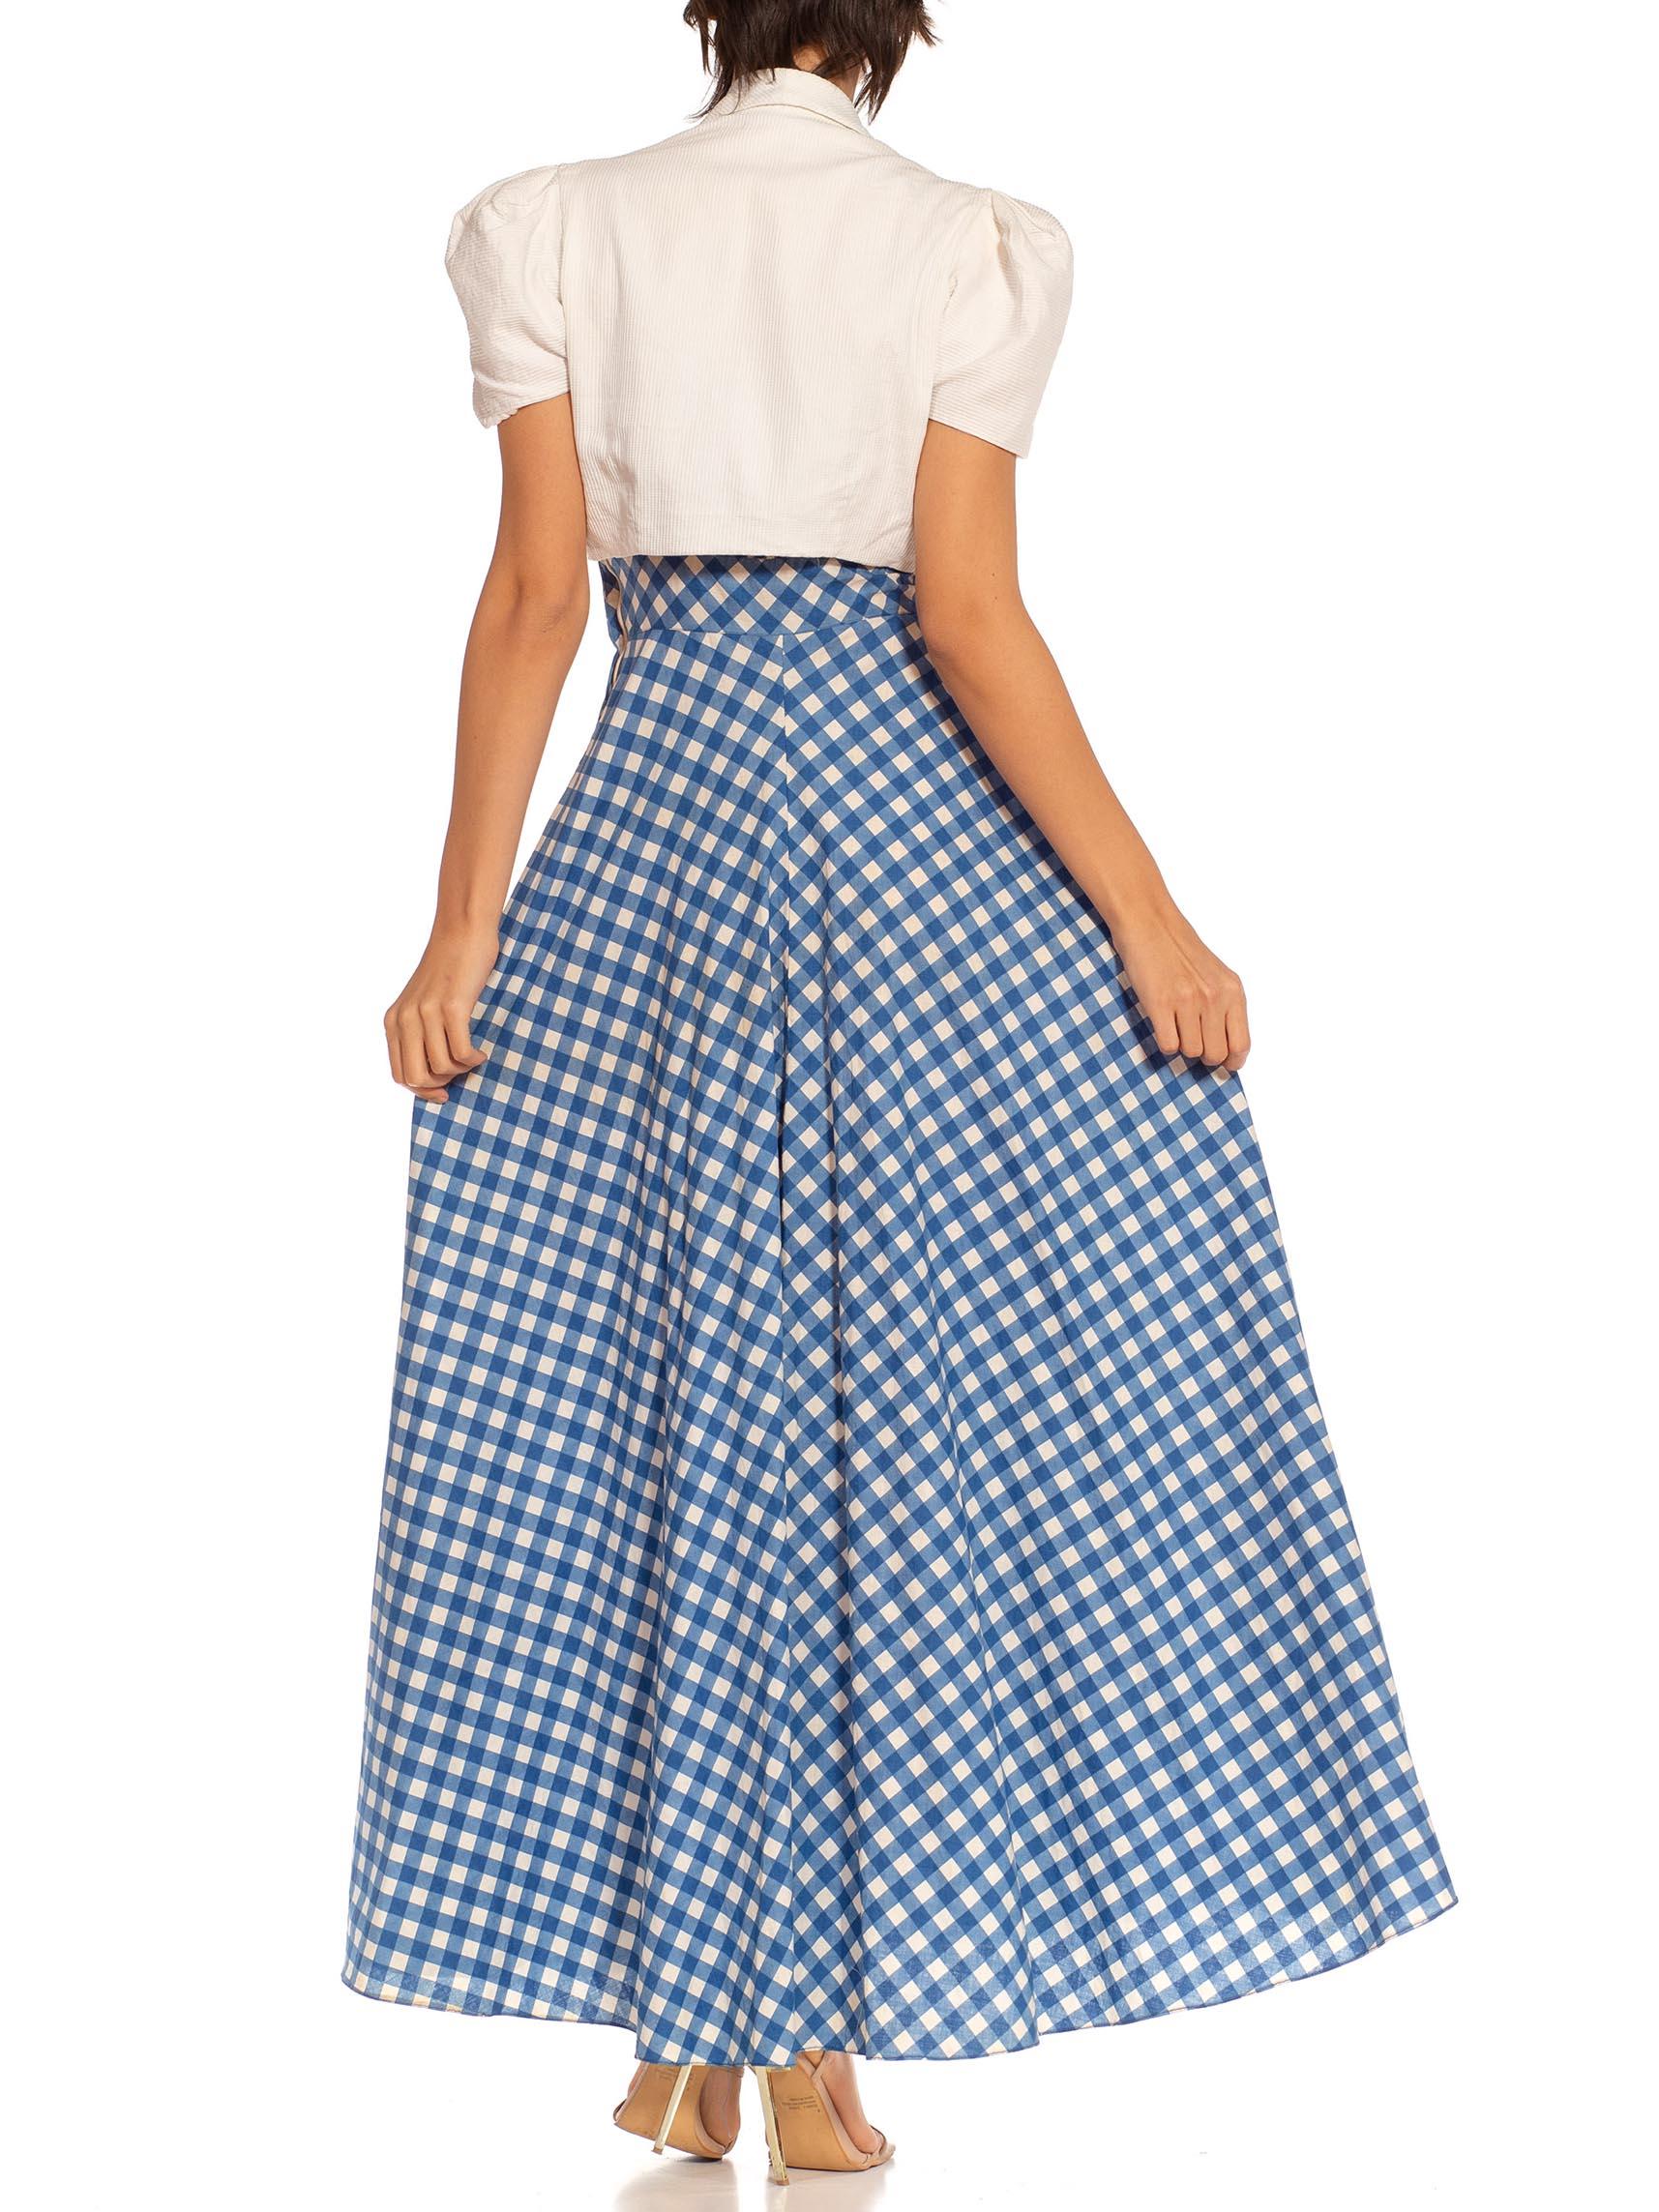 1930S White & Blue Cotton Gingham Full Skirt Dress With Matching Jacket Deadsto In Excellent Condition For Sale In New York, NY